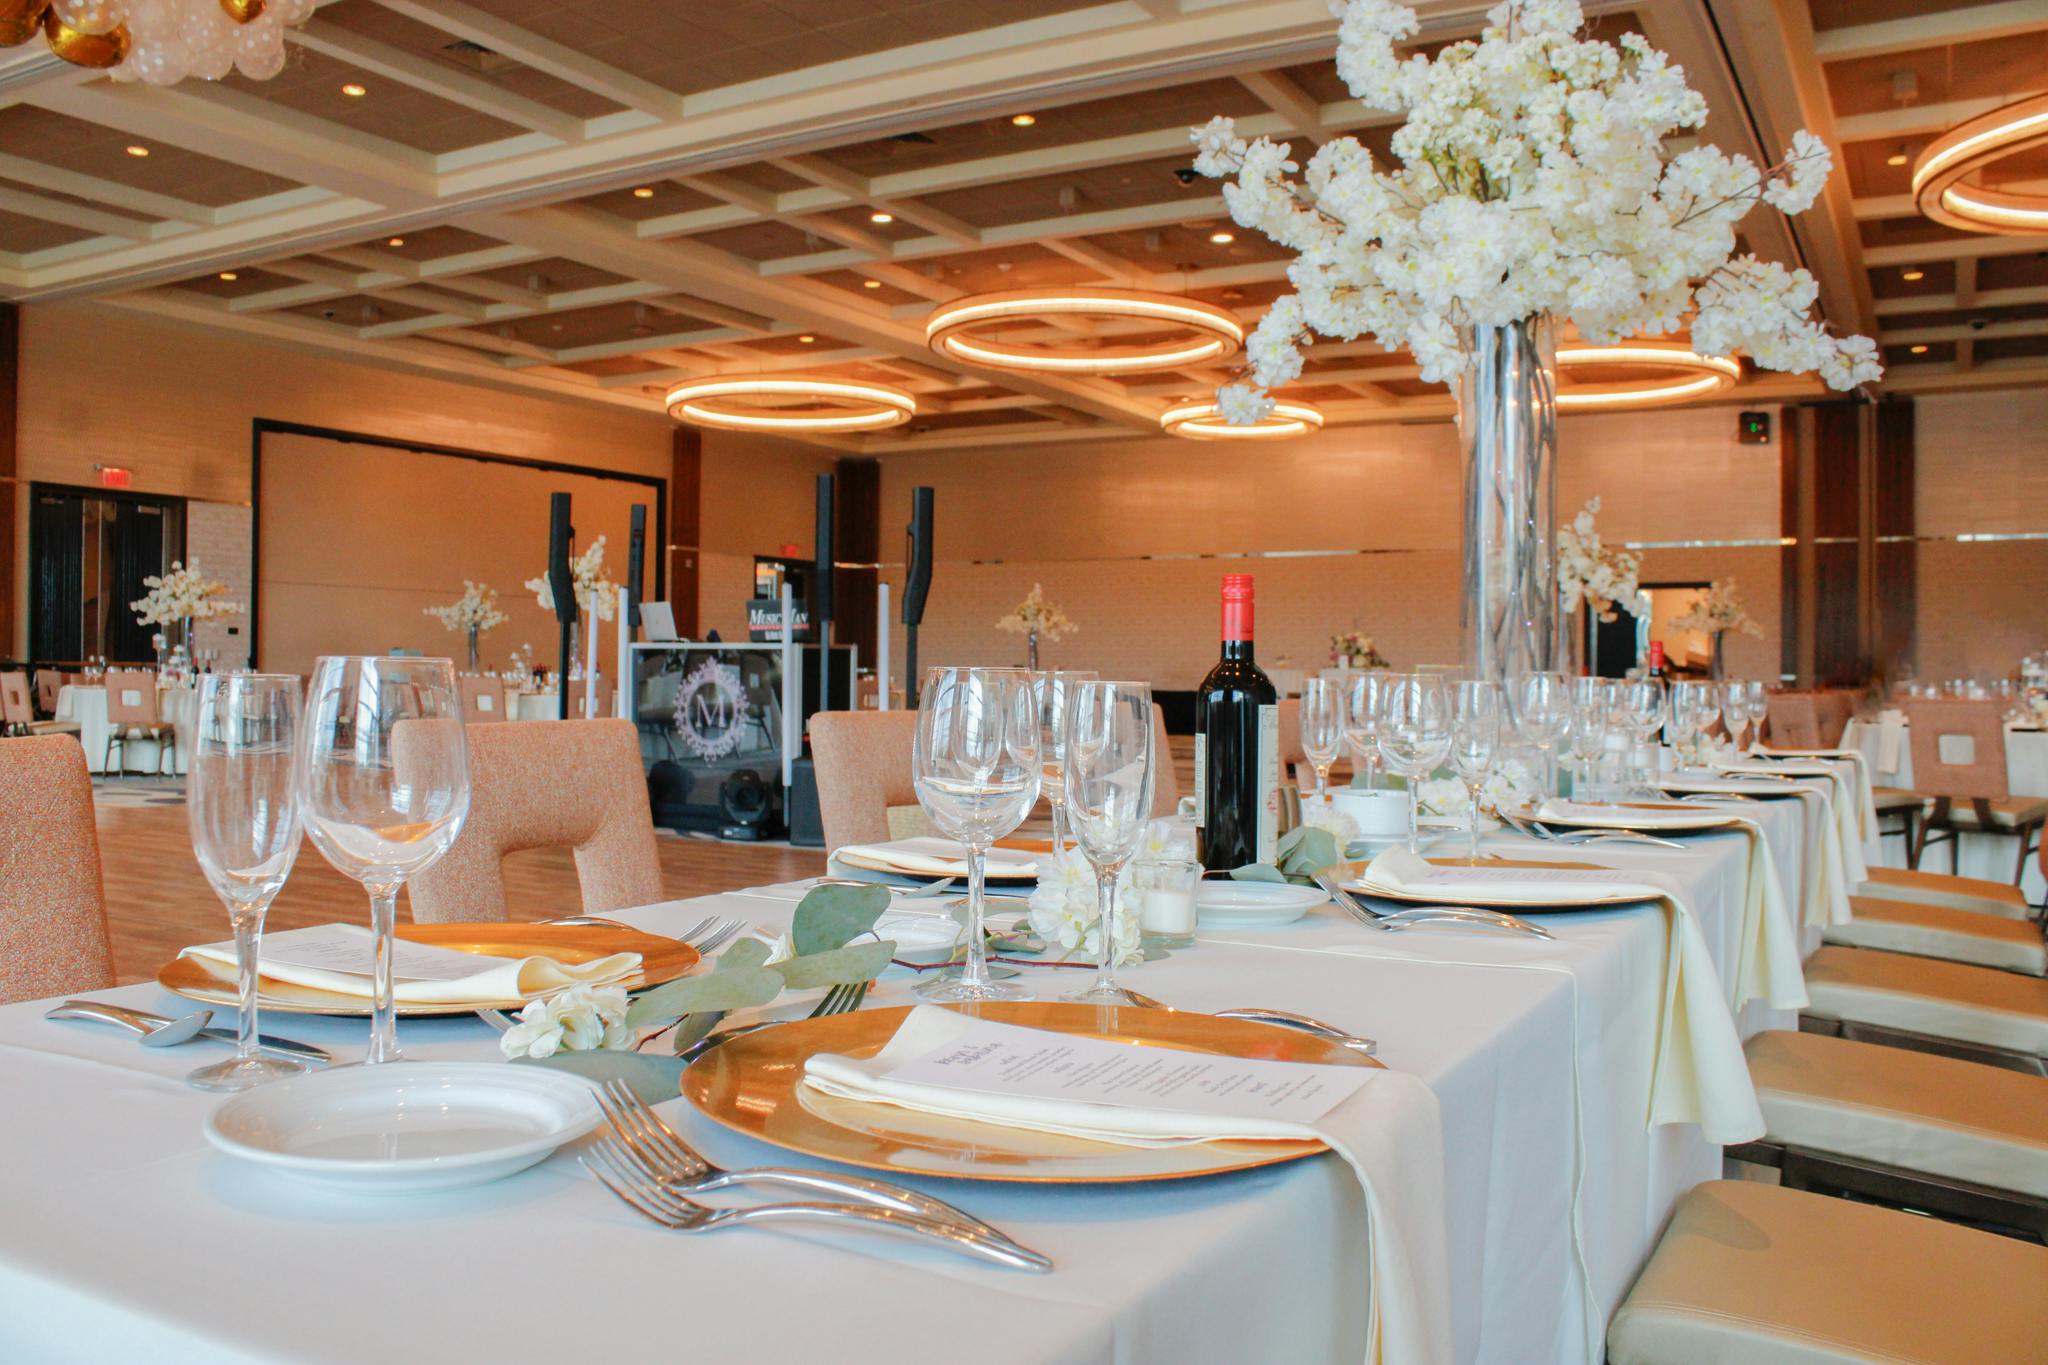 Our customizable Event Center is just shy of 9,000 square feet at full size